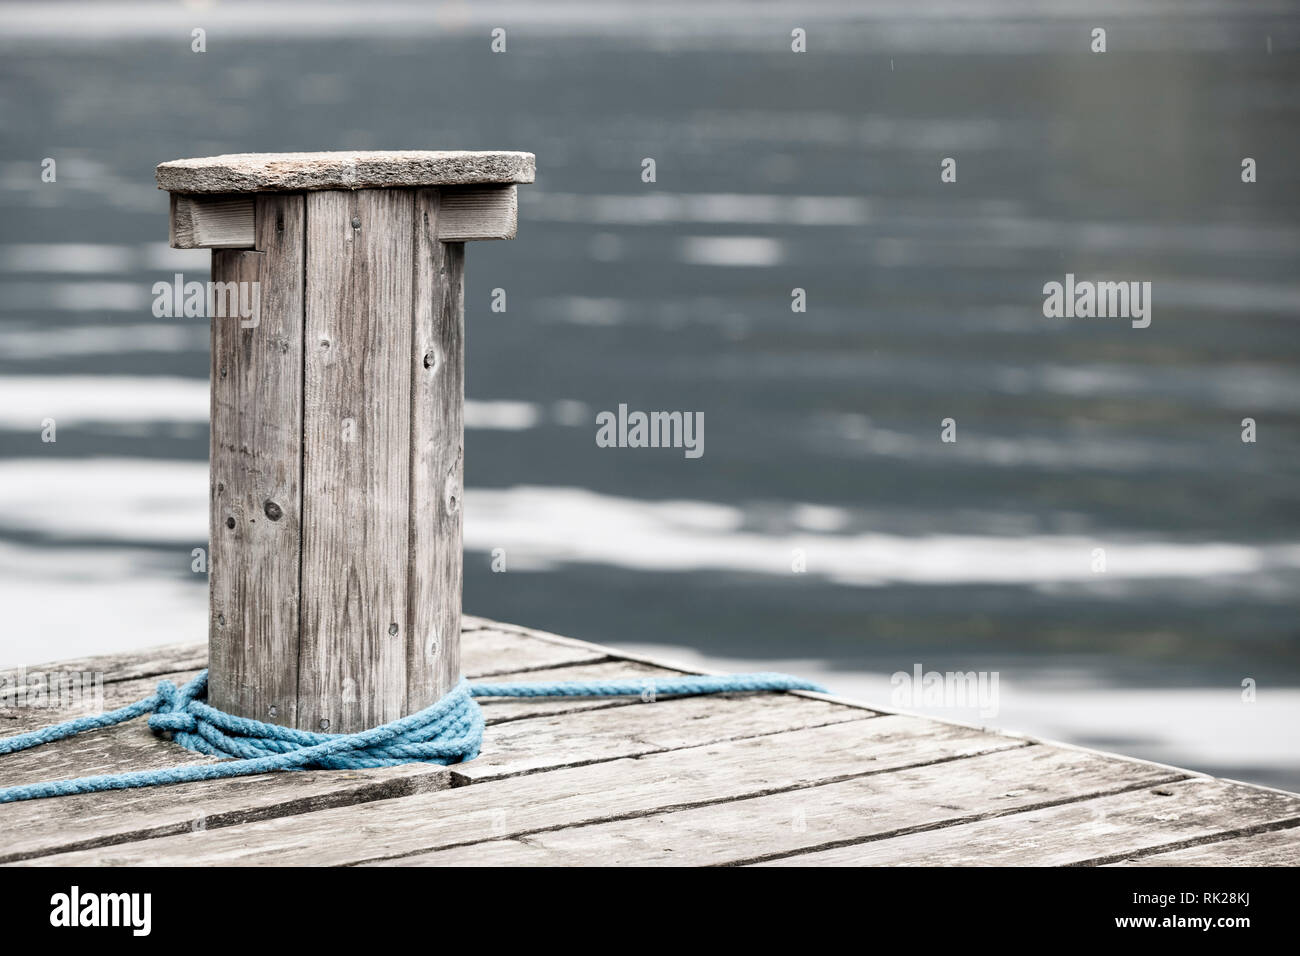 Blue rope wrapped around wooden post by rippling water Stock Photo